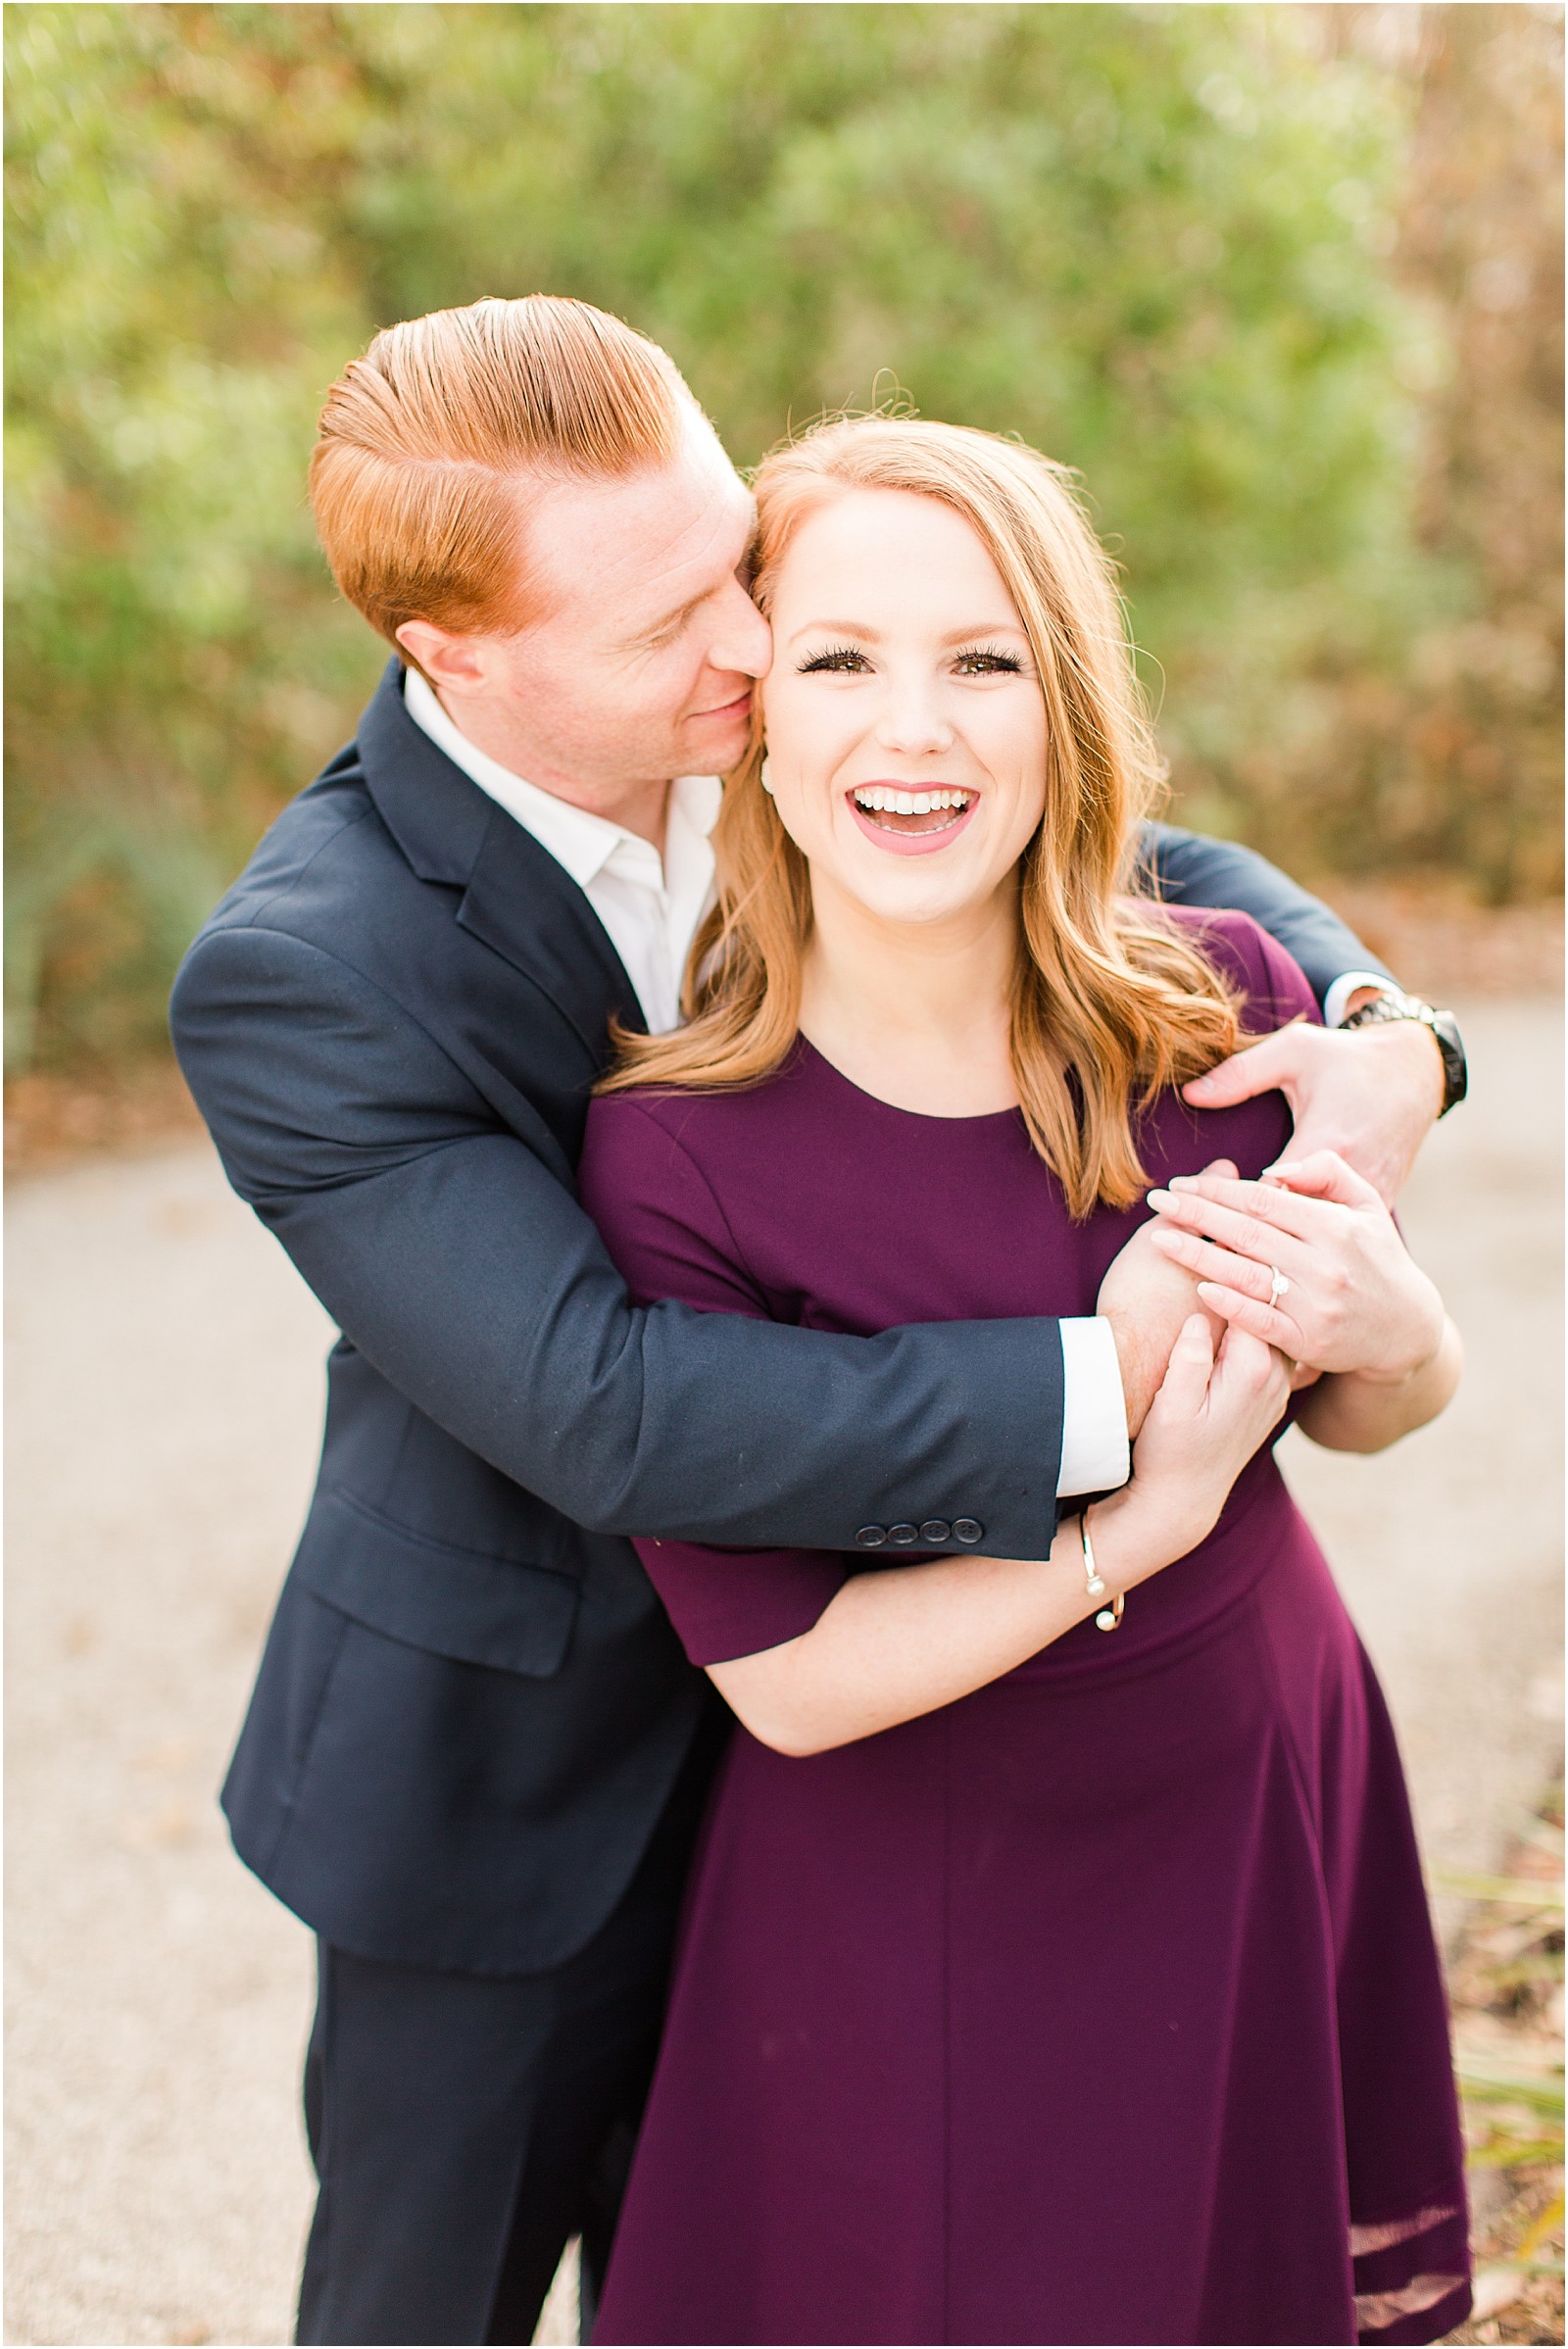 A Mesker Park Zoo Engagement Session | Jennah and Steve | Bret and Brandie Photography010.jpg